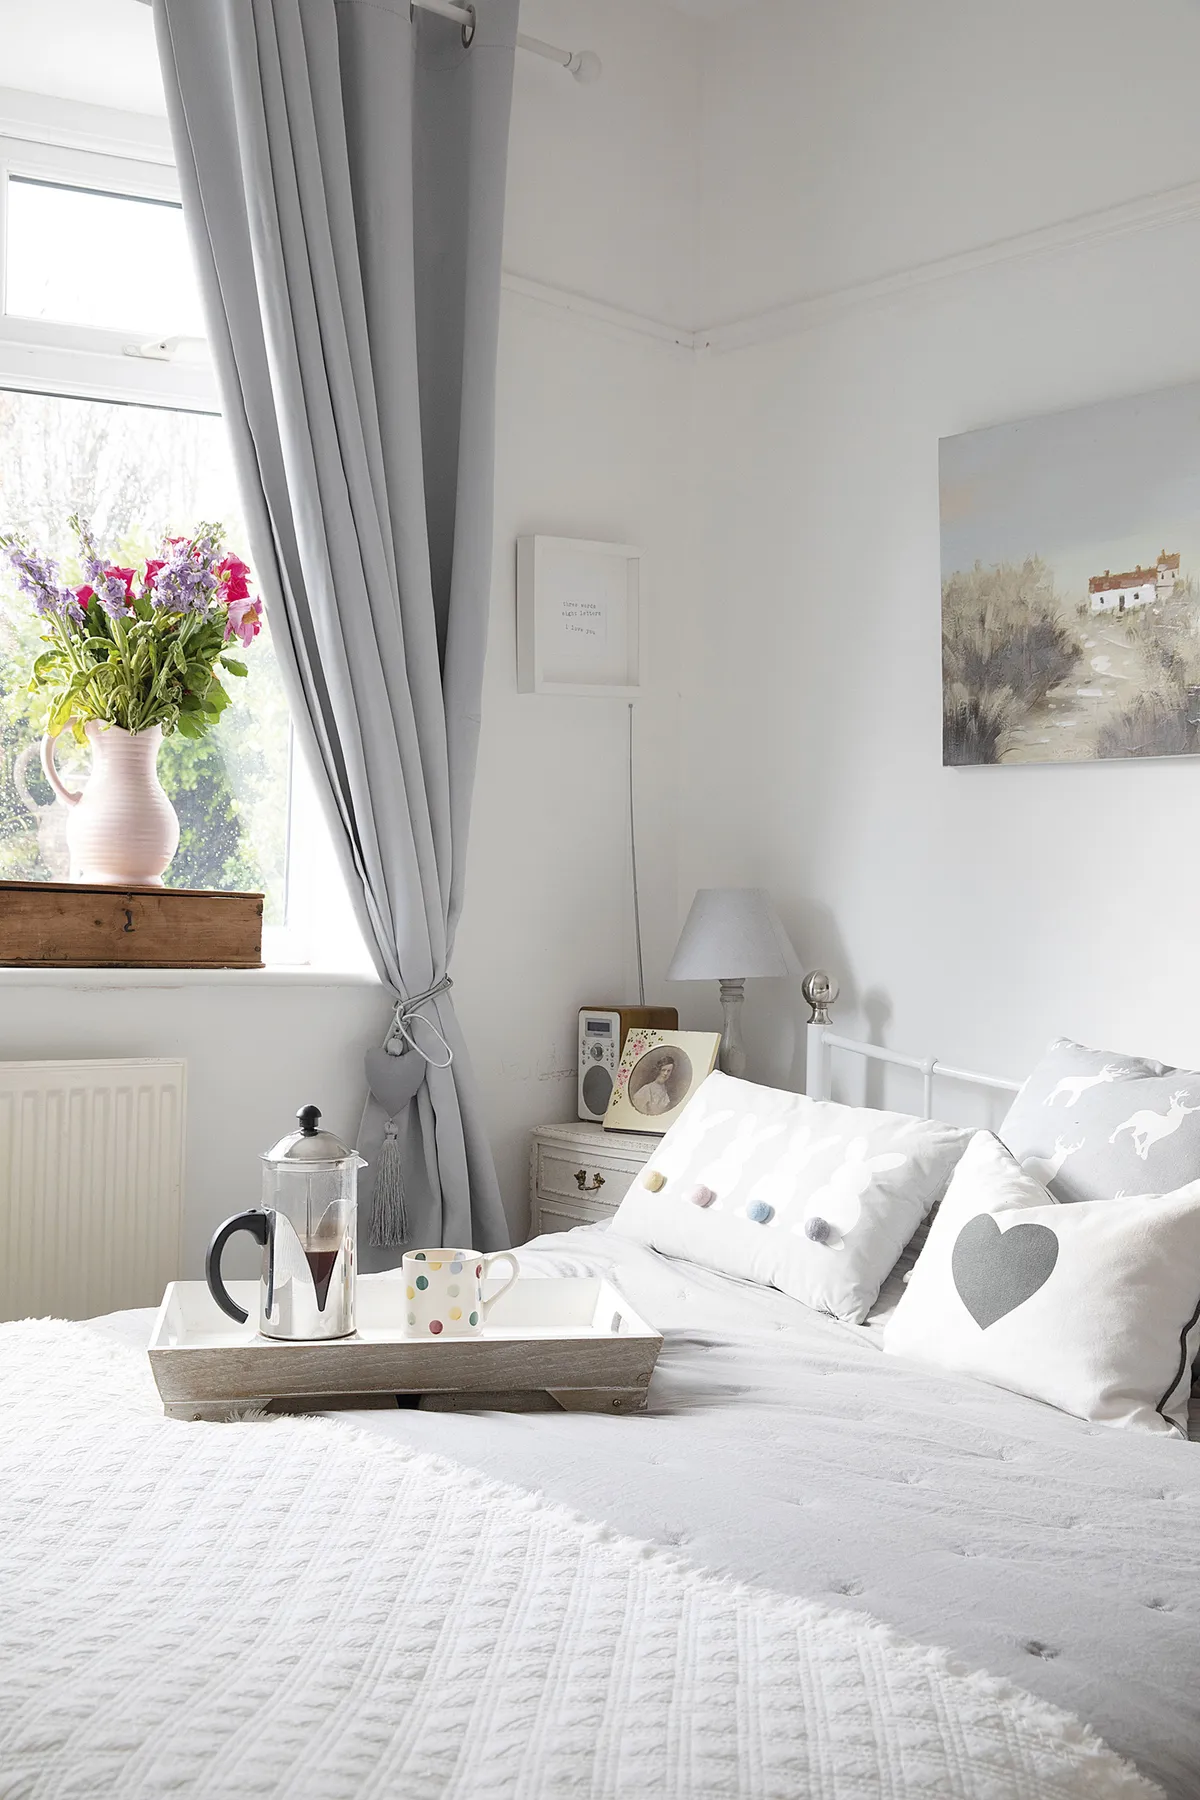 With fresh flowers and a hot pot of coffee, Sandra has the spare room ready and waiting for visitors